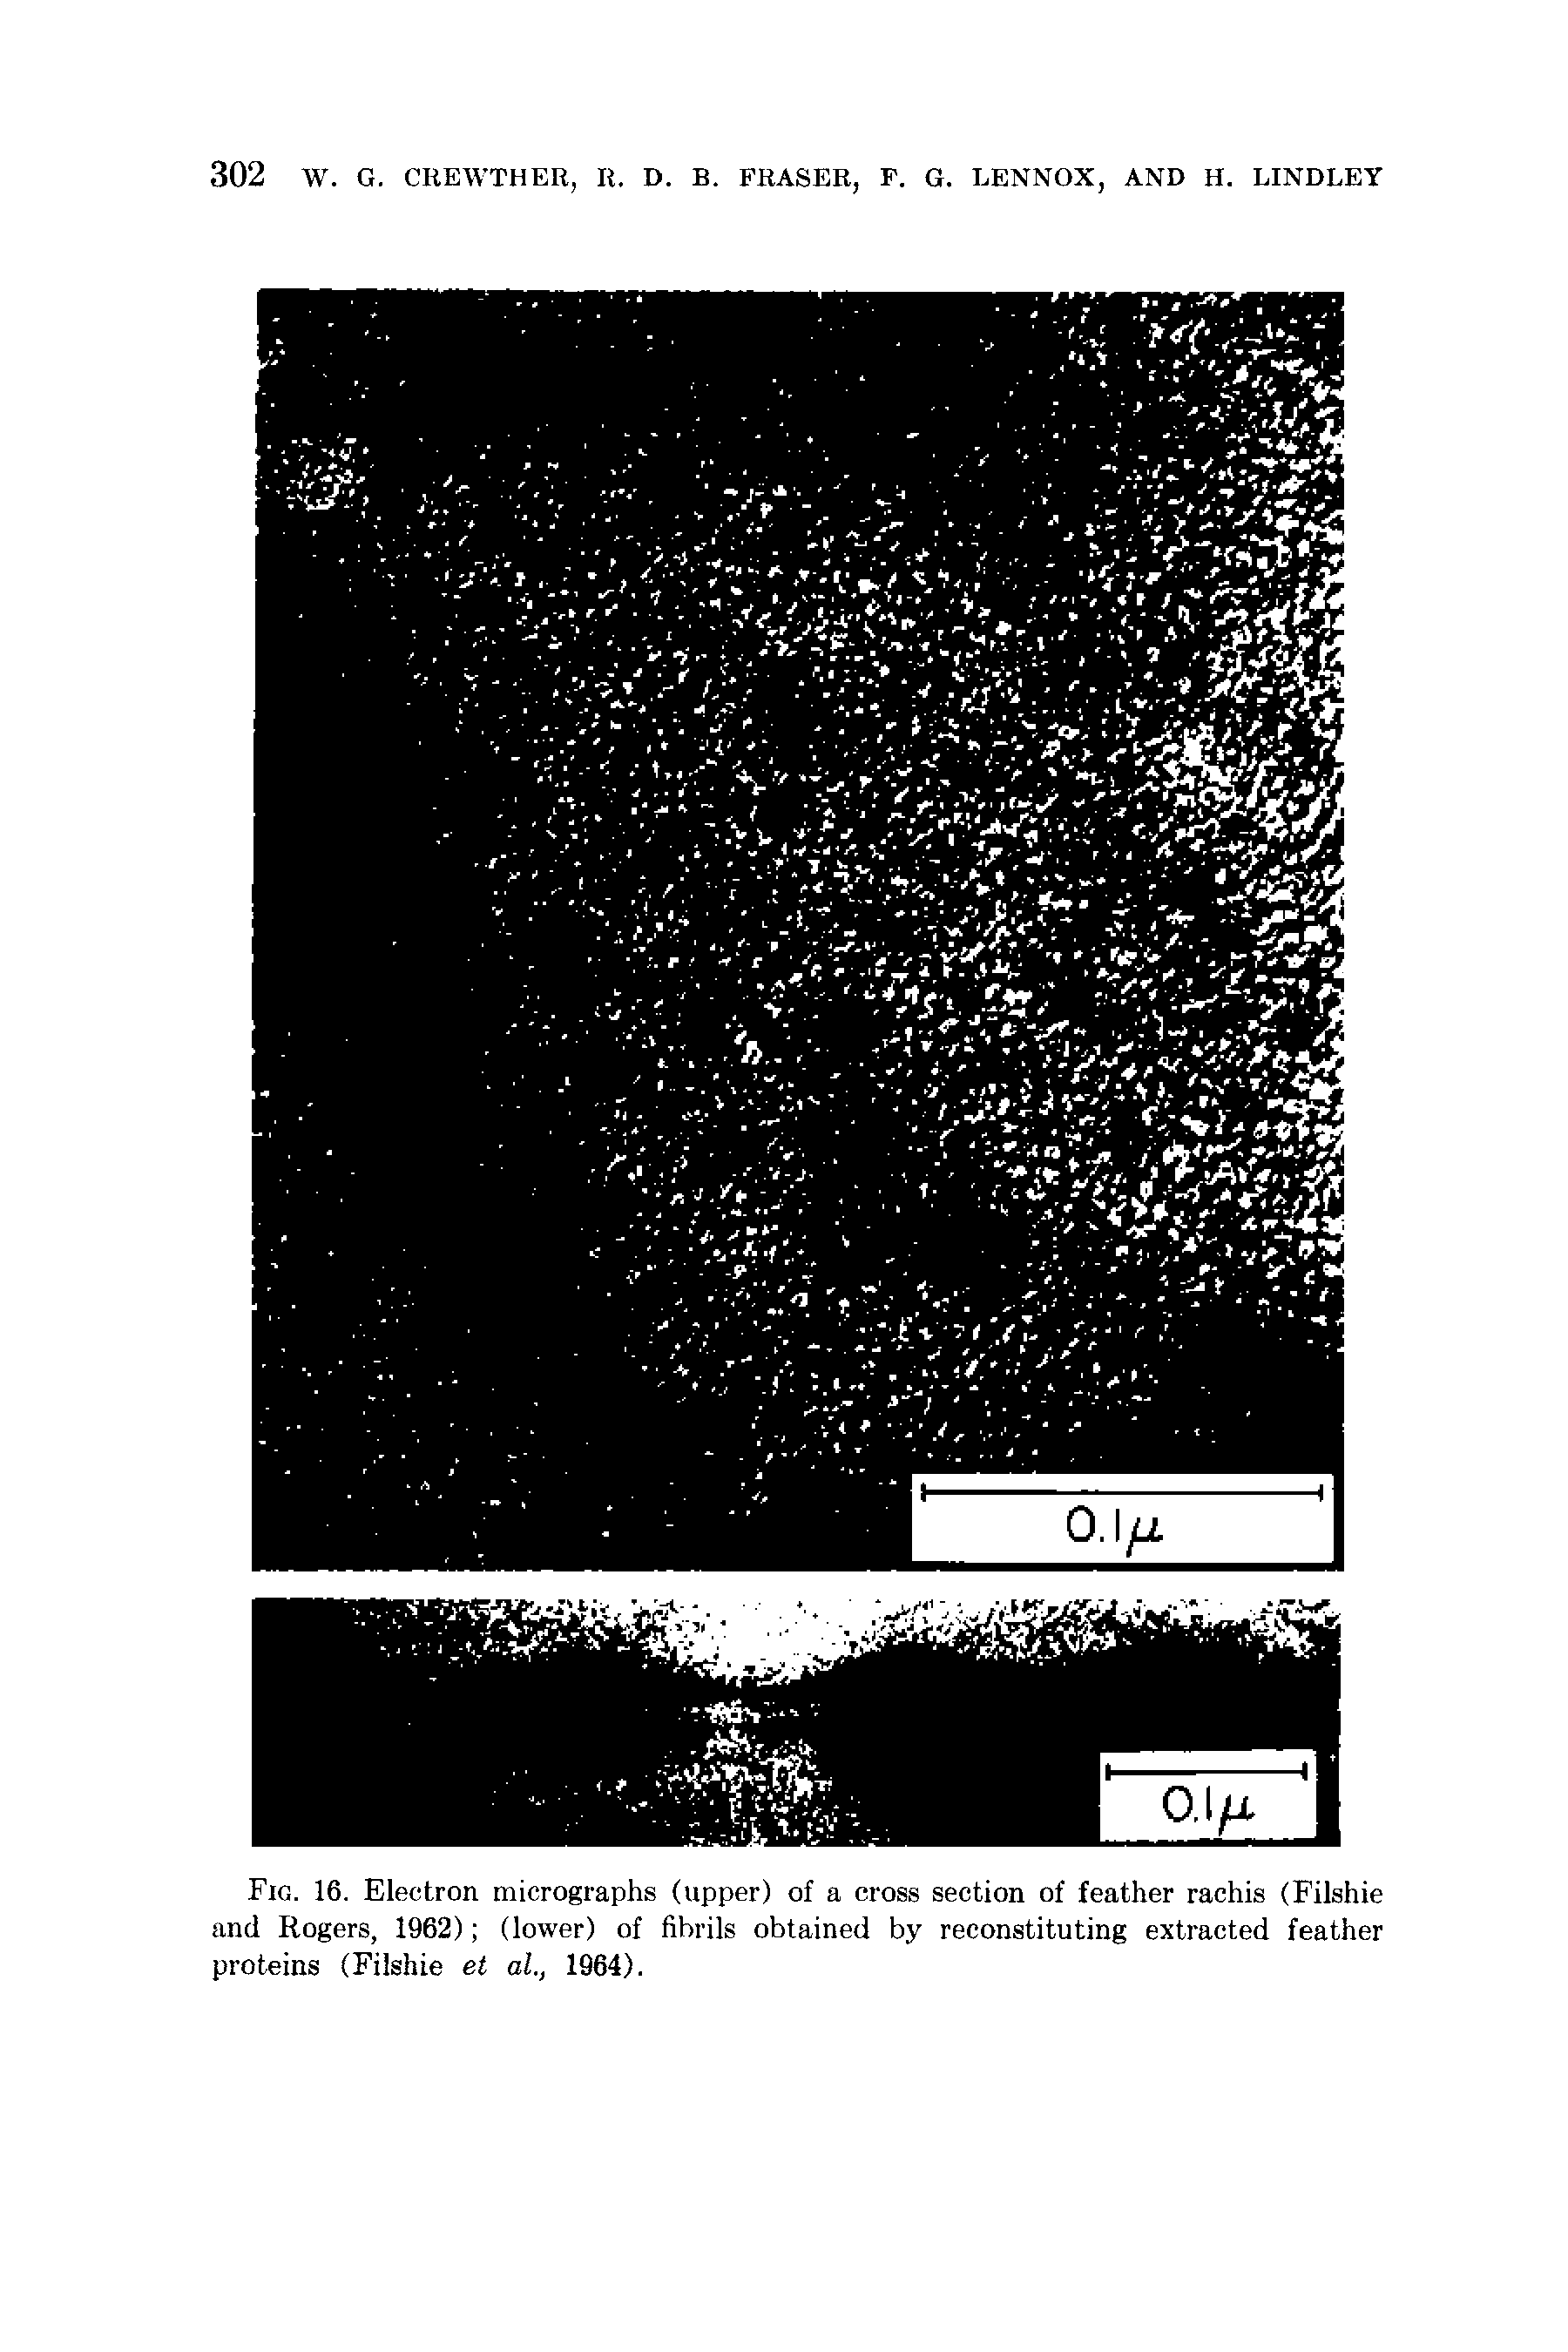 Fig. 16. Electron micrographs (upper) of a cross section of feather rachis (Filshie and Rogers, 1962) (lower) of fibrils obtained by reconstituting extracted feather proteins (Filshie et al., 1964).